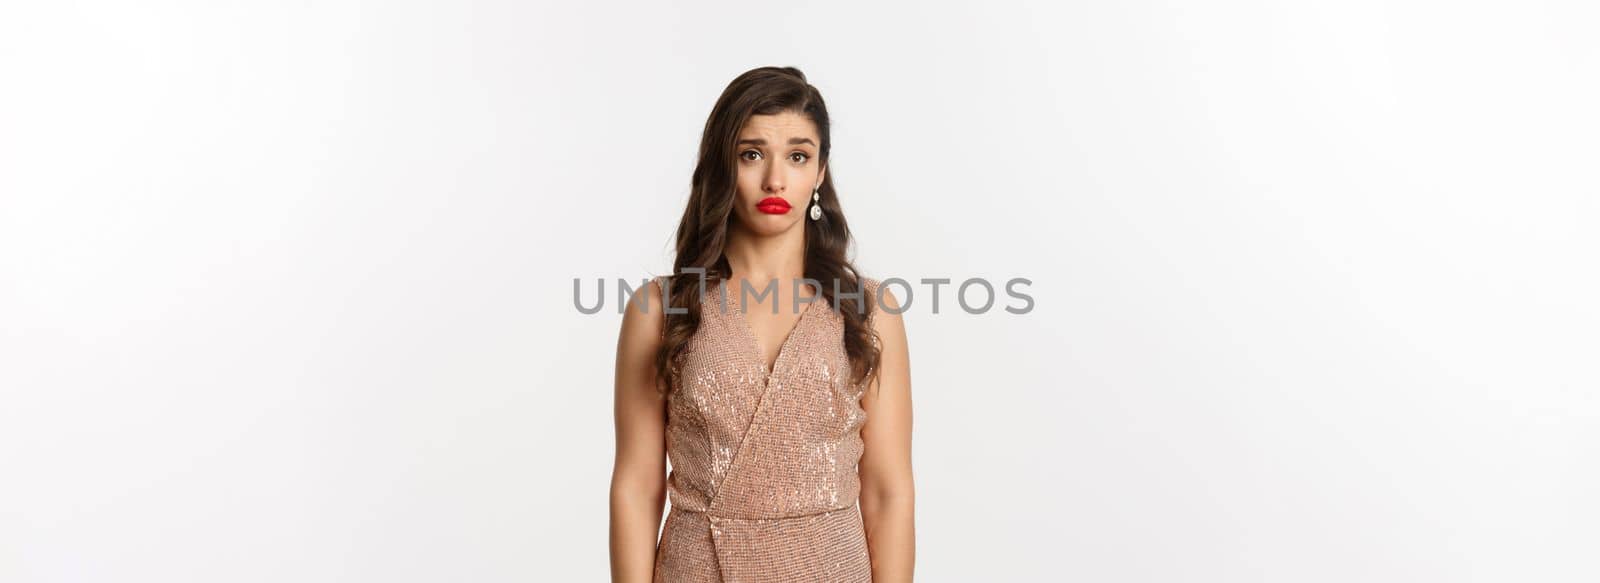 Celebration and party concept. Sad and confused young woman in glamour dress staring at camera distressed, standing against white background.